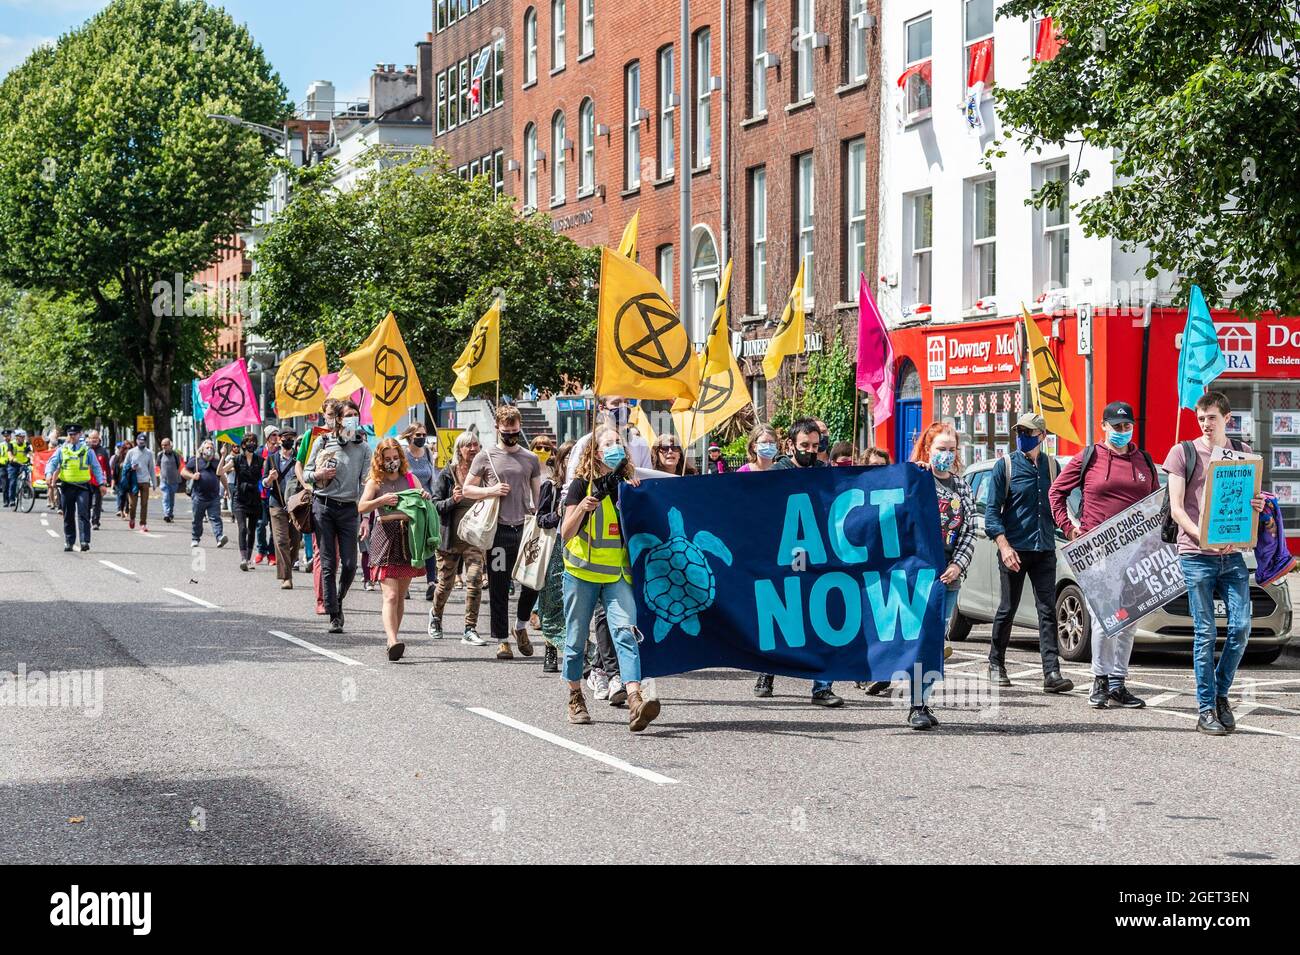 Cork, Ireland. 21st Aug, 2021. A small group of approx. 60 Extinction Rebellion protestors assembled on the Grand Parade today to highlight the need for 'immediate and fair action for carbon neutrality'. After a number of speeches, the group marched down the South Mall and up Patrick Street before breaking into discussion groups back at Grand Parade. Credit: AG News/Alamy Live News Stock Photo